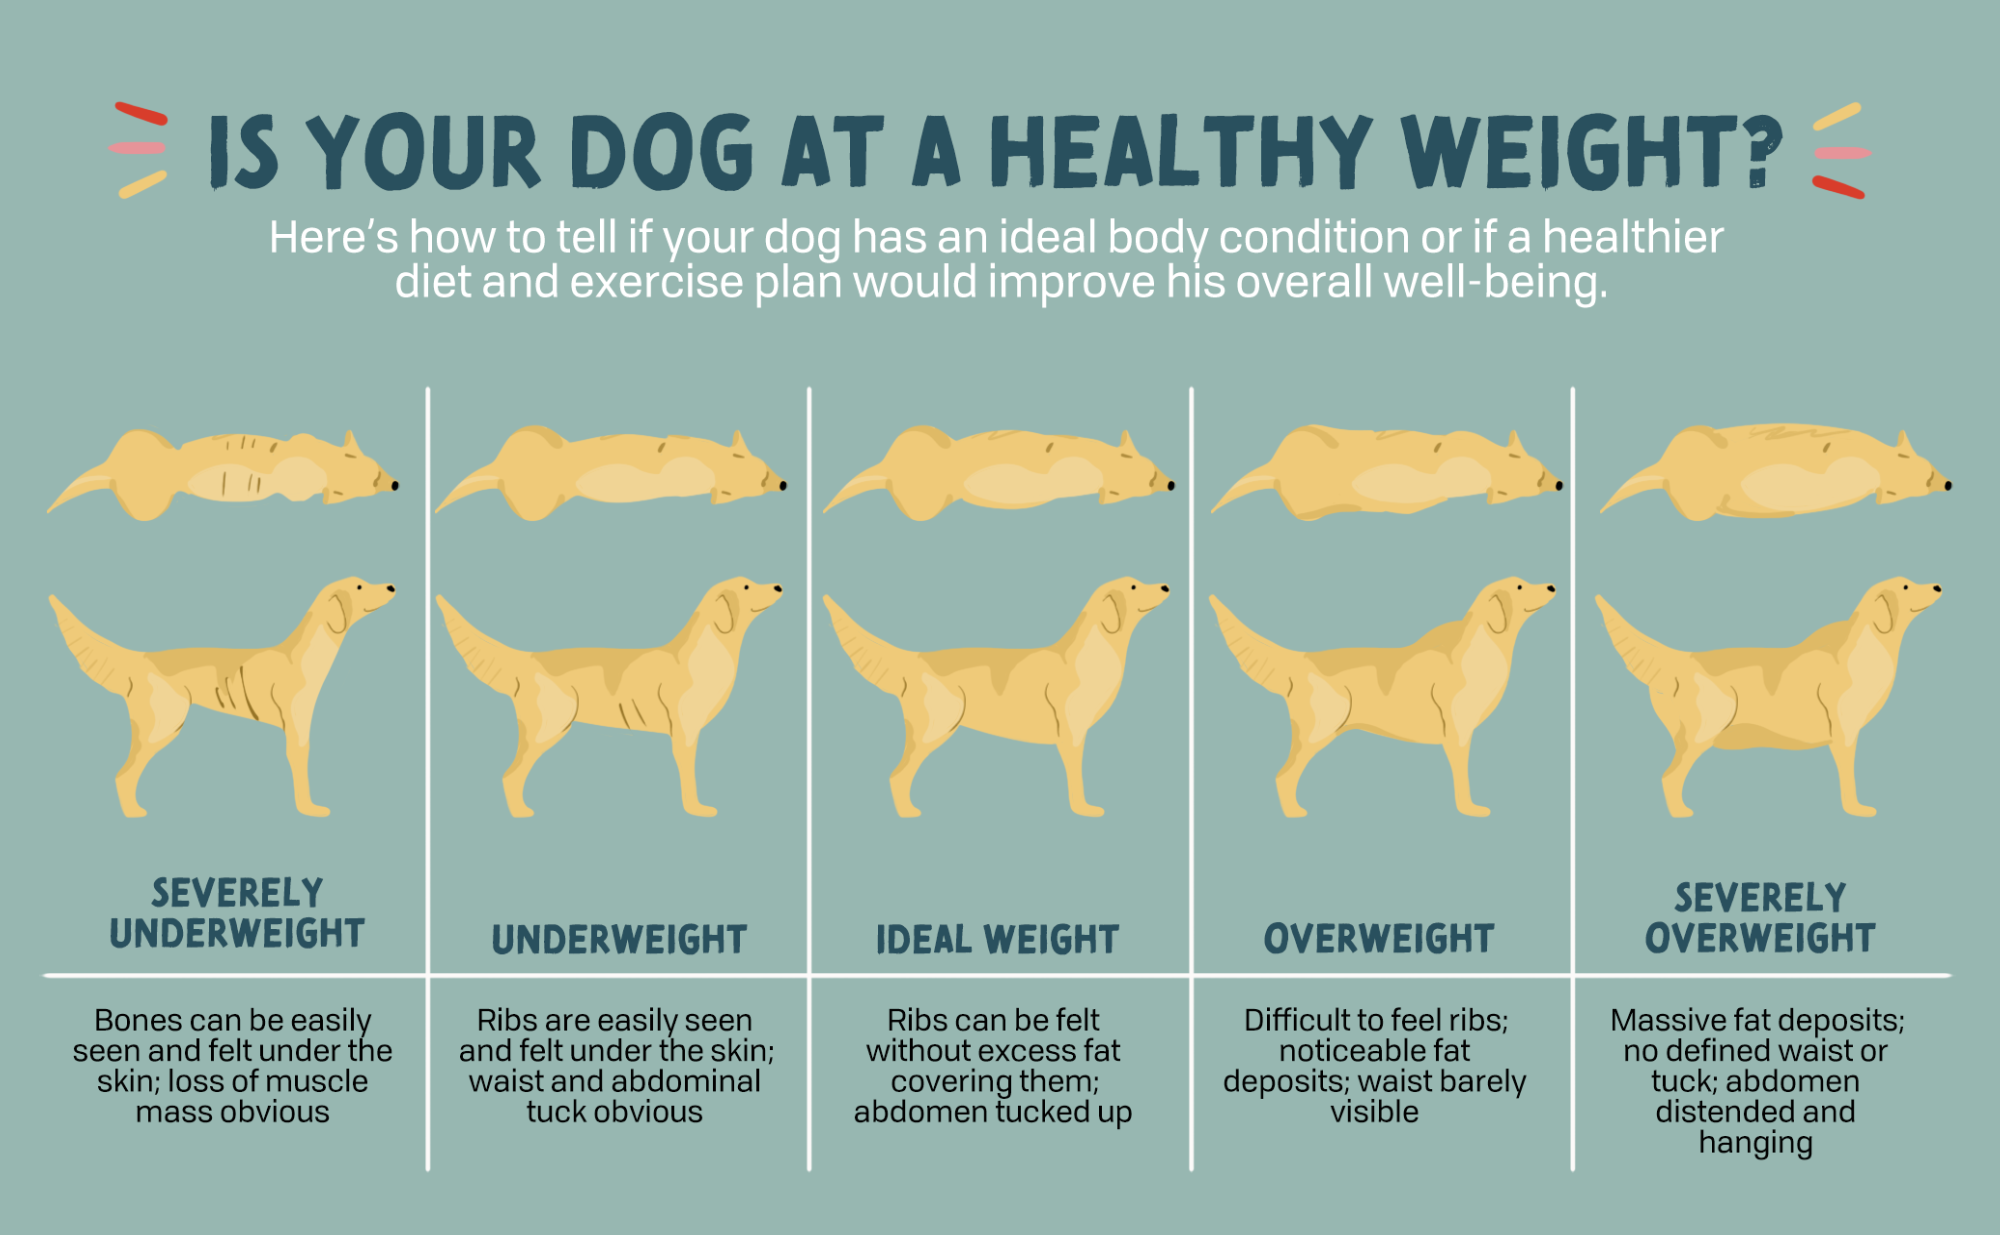 Is My Dog Overweight? Calculating BCS vs Dog BMI